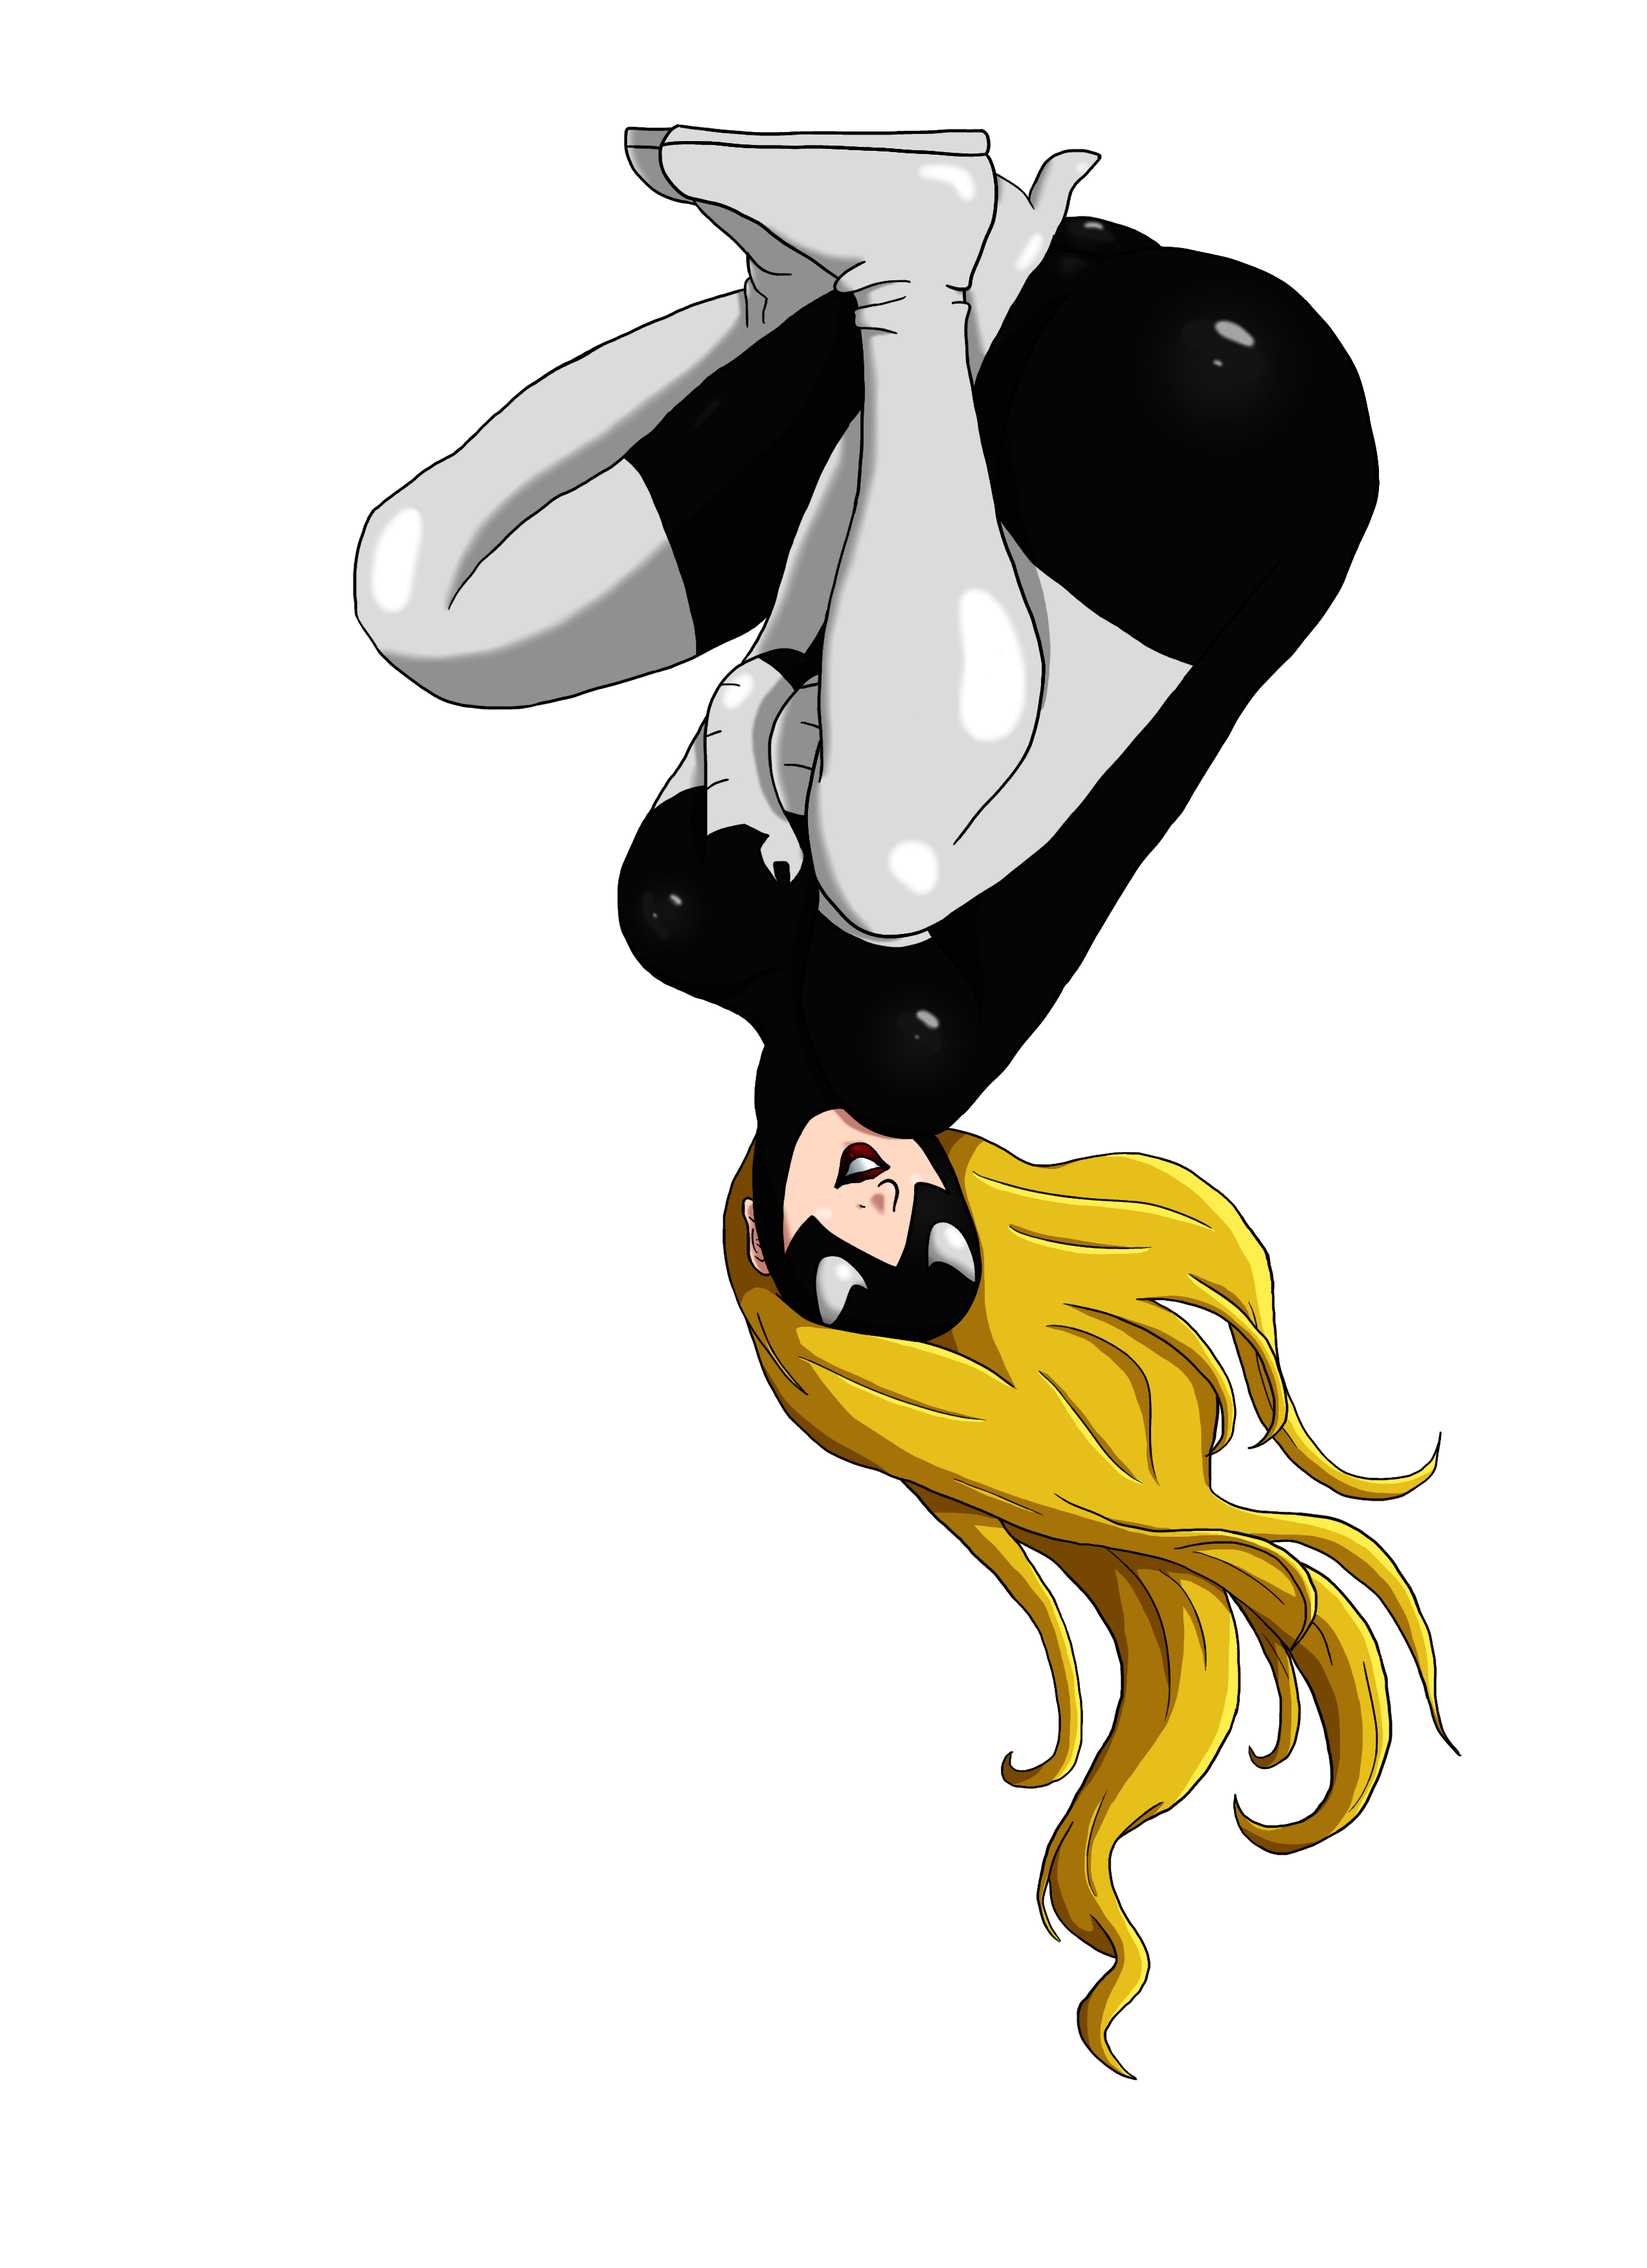 Spider Woman Image PNG Image